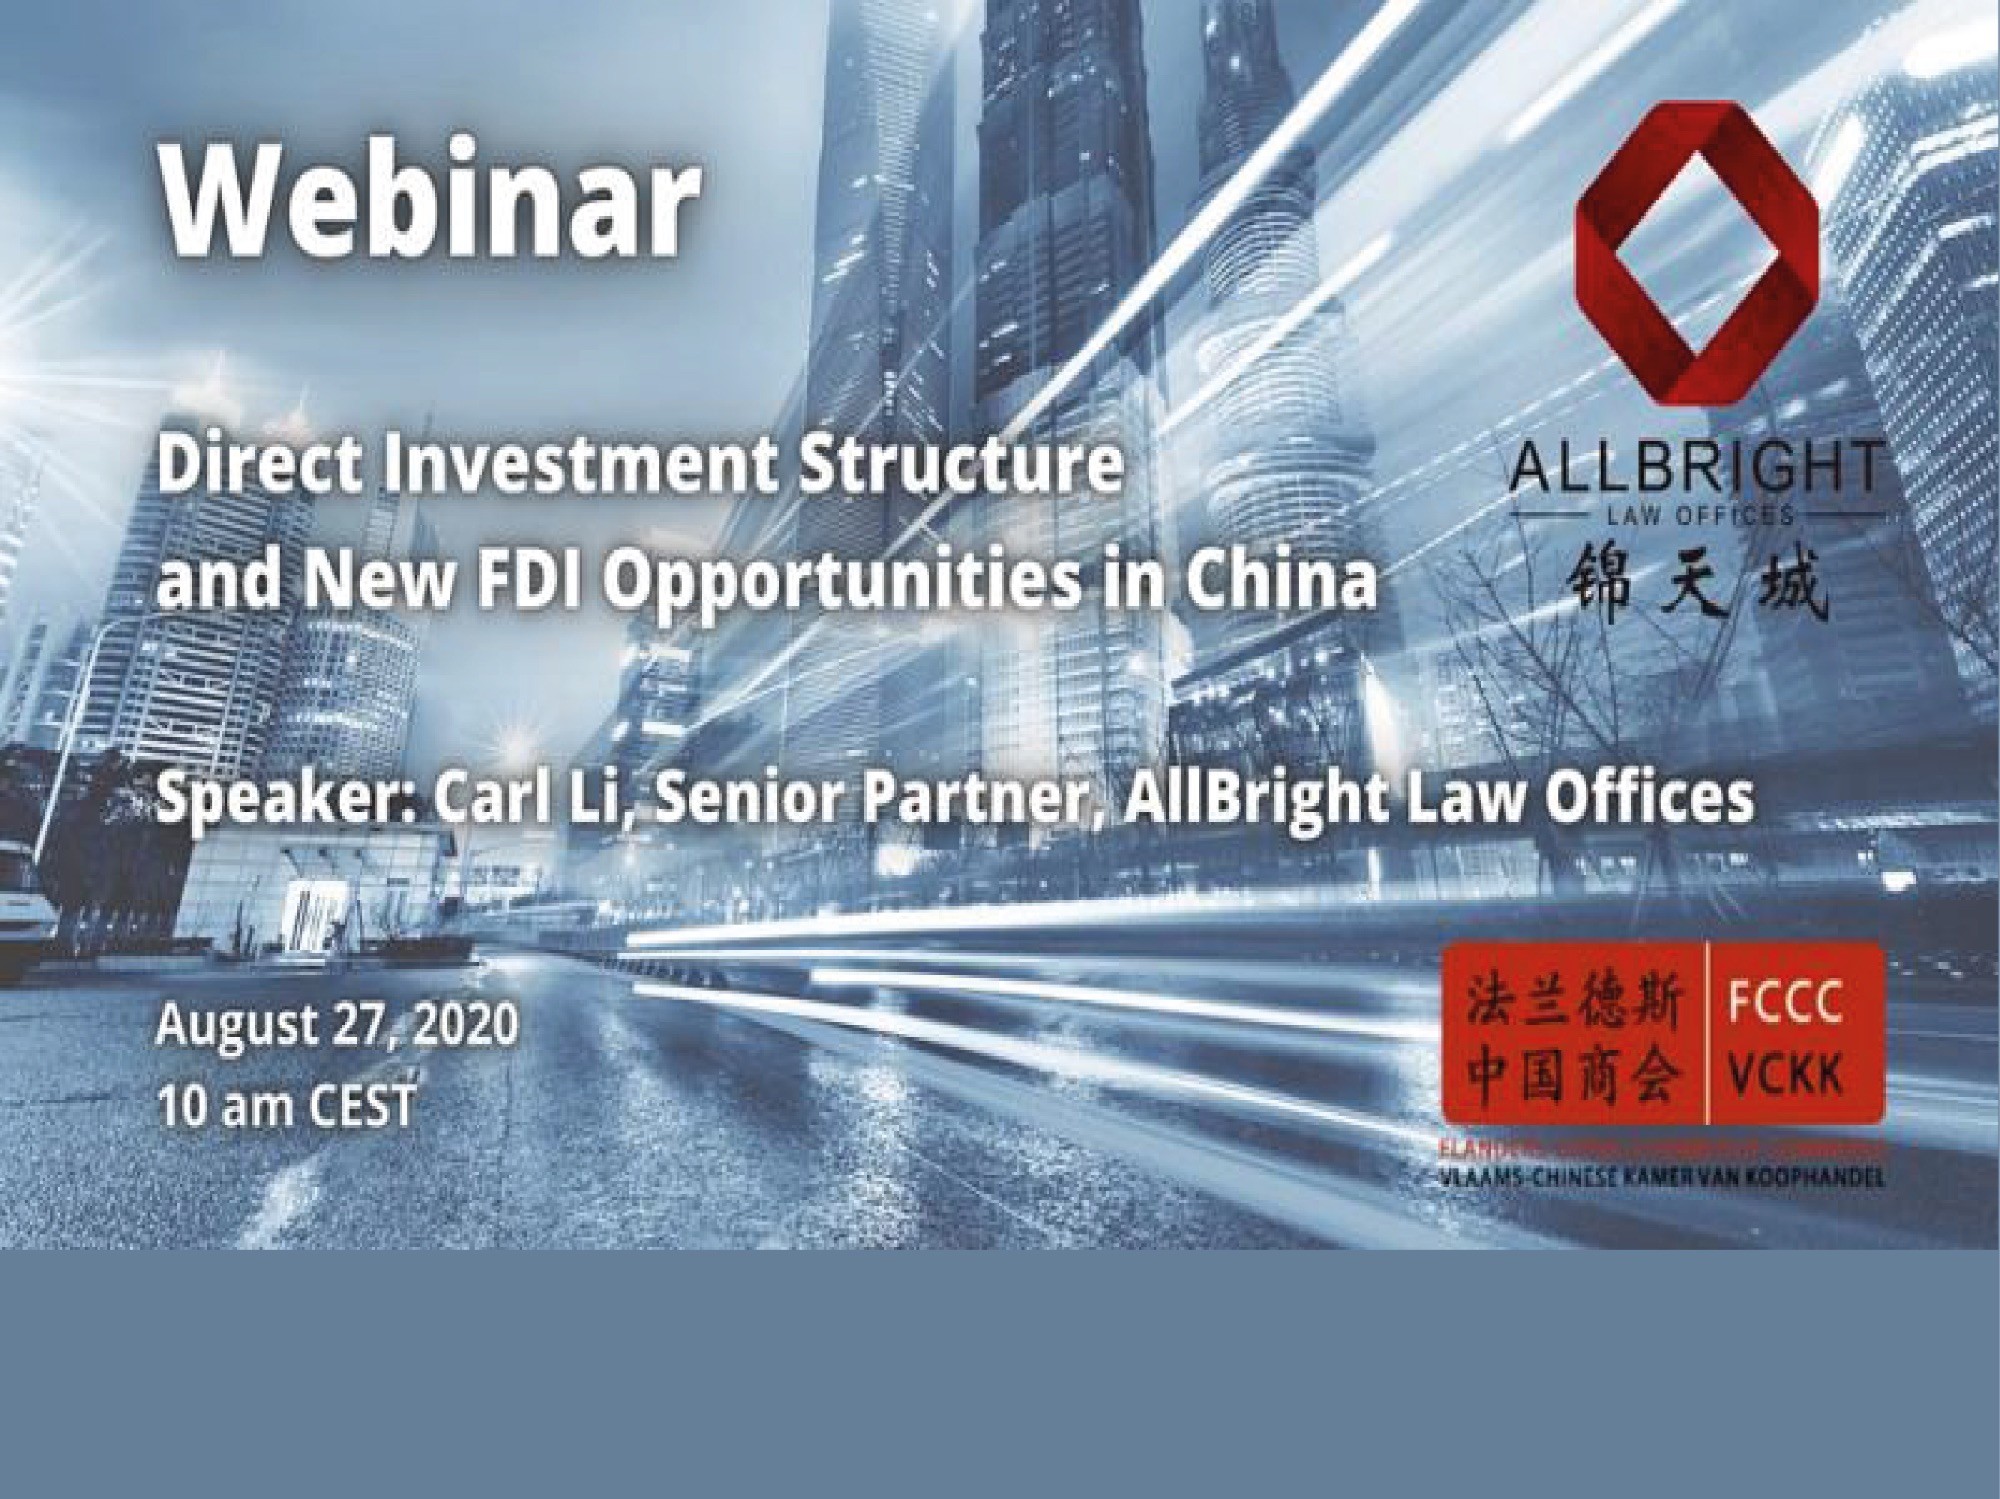 Webinar: Direct Investment Structure and New FDI Opportunities in China